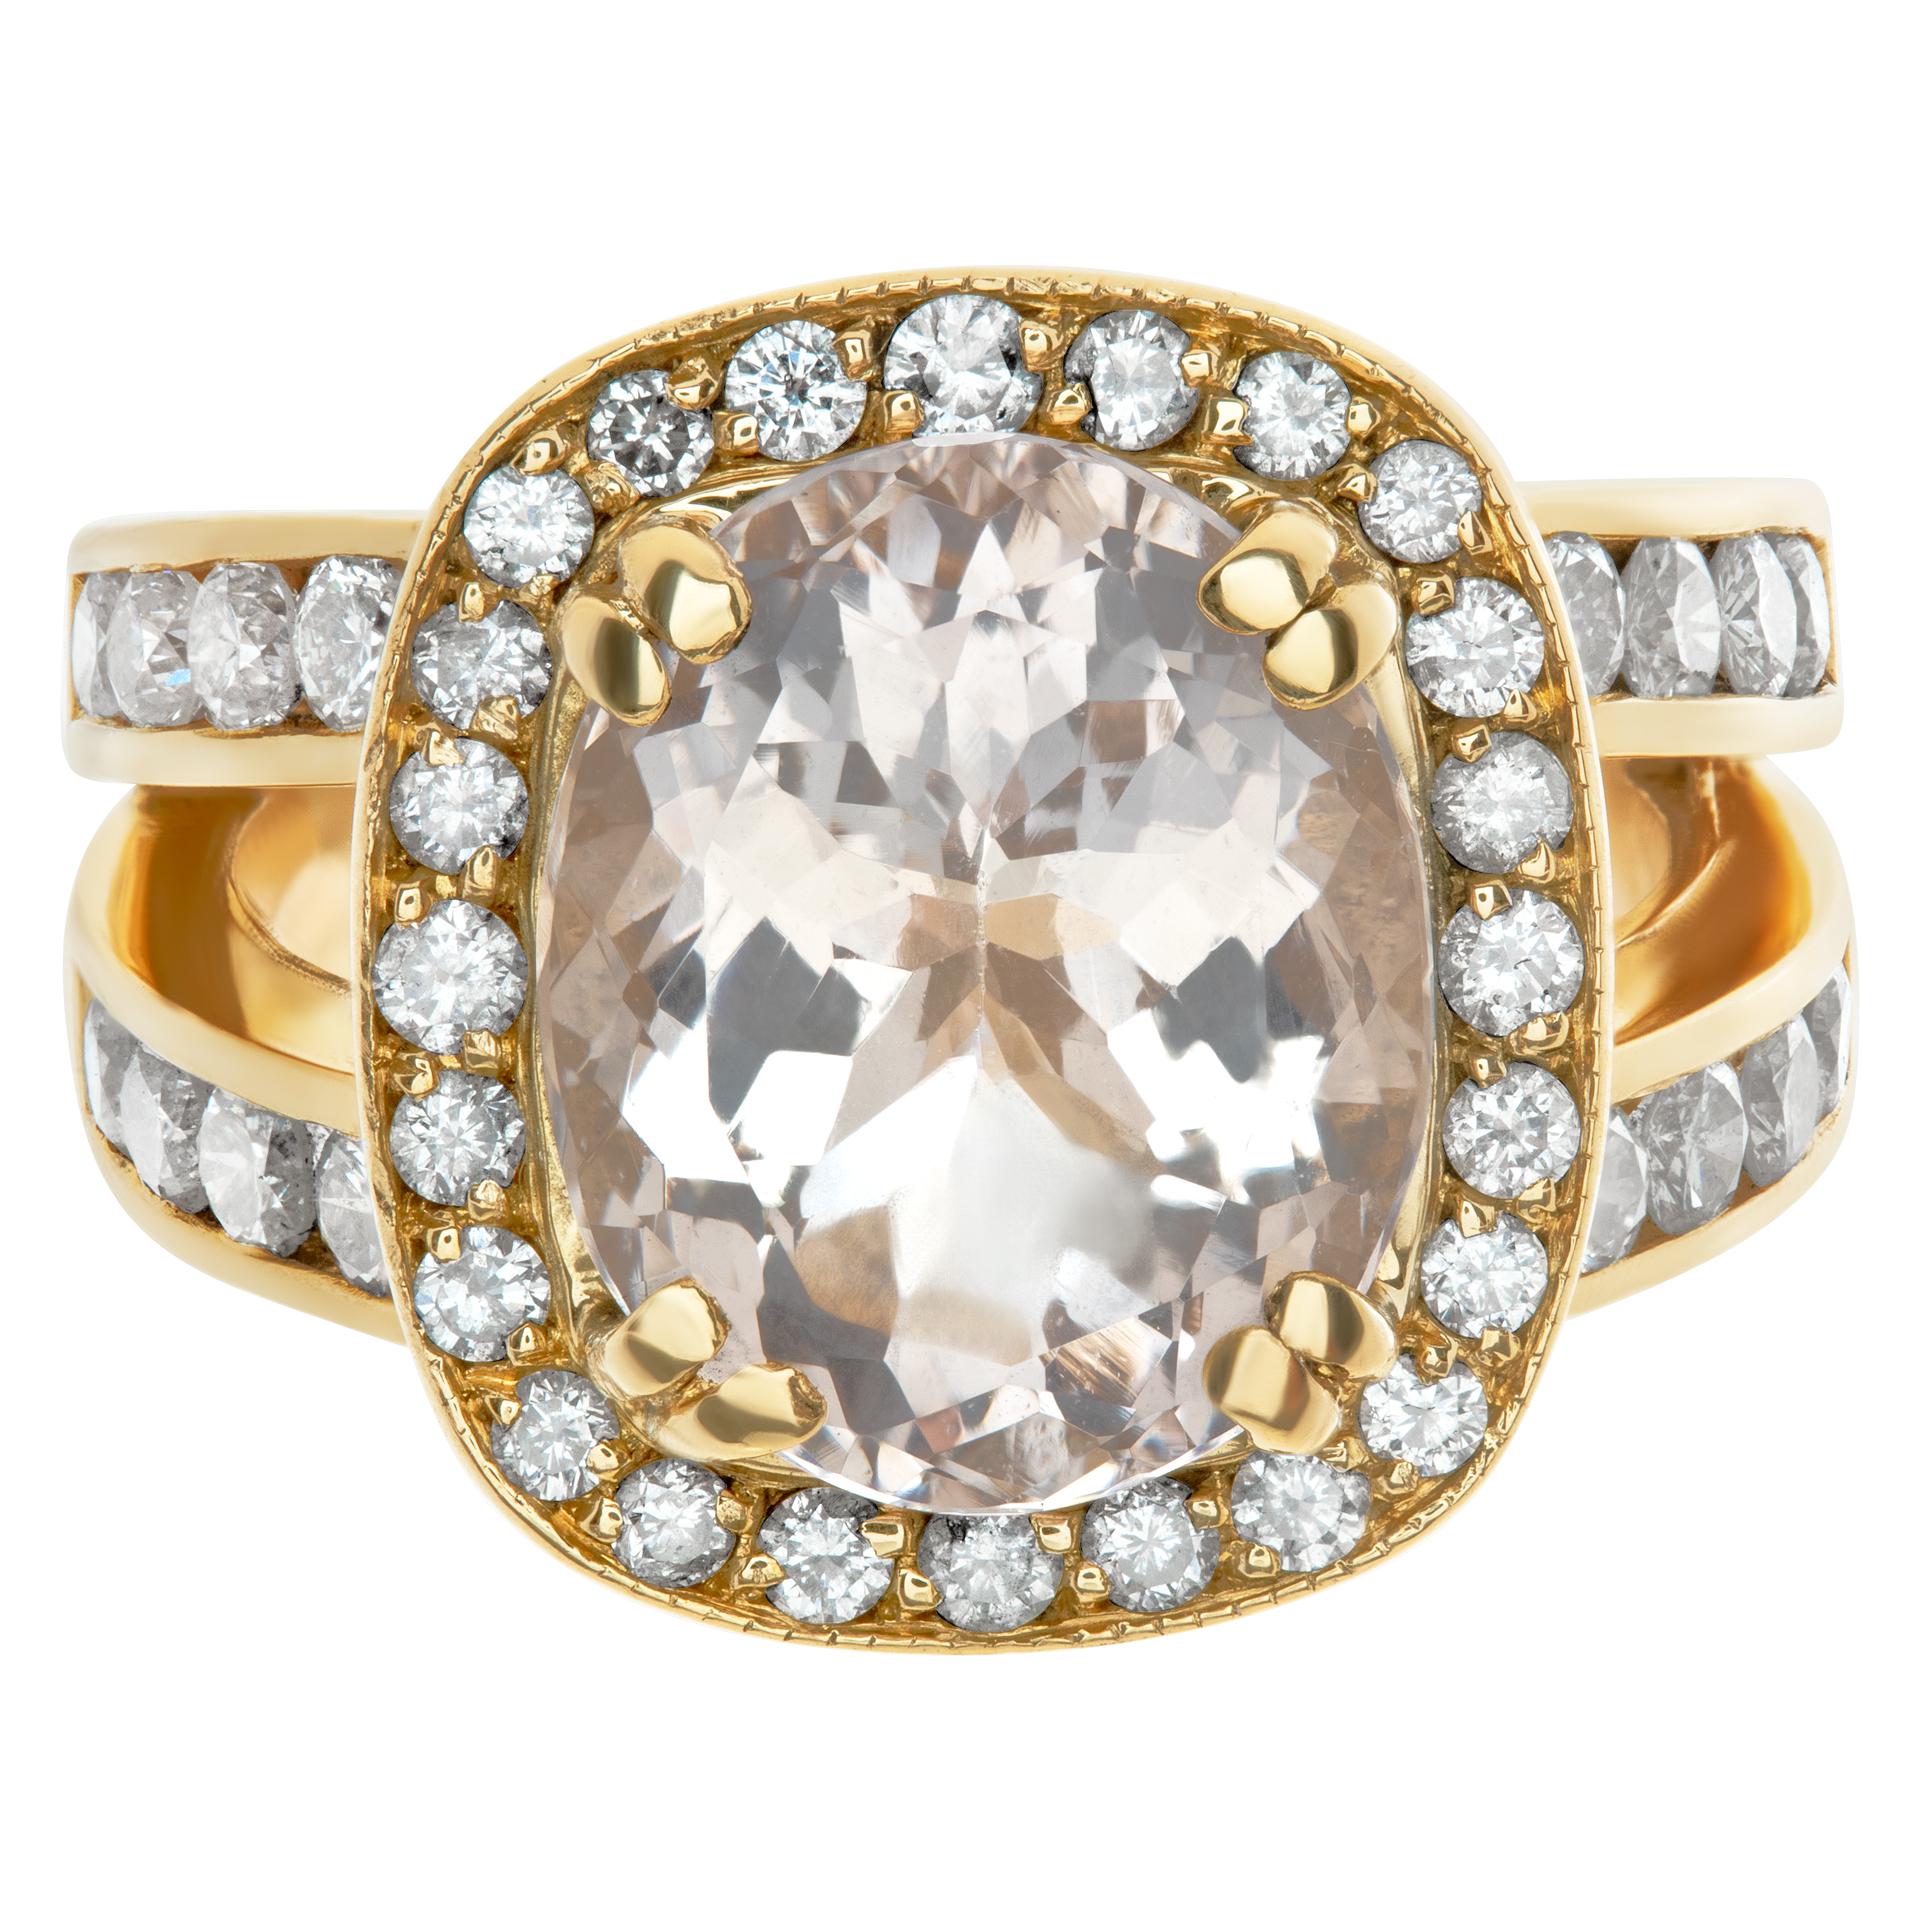 Morganite and diamond ring in 18k yellow gold. Brilliant cushion cut morganite (over 5.30 carats). Round brilliant cut diamond total approx. weight: 1.10 carat, estimate: G-H color, VS clarity. 15 x15mm. Size 6This Tourmaline ring is currently size